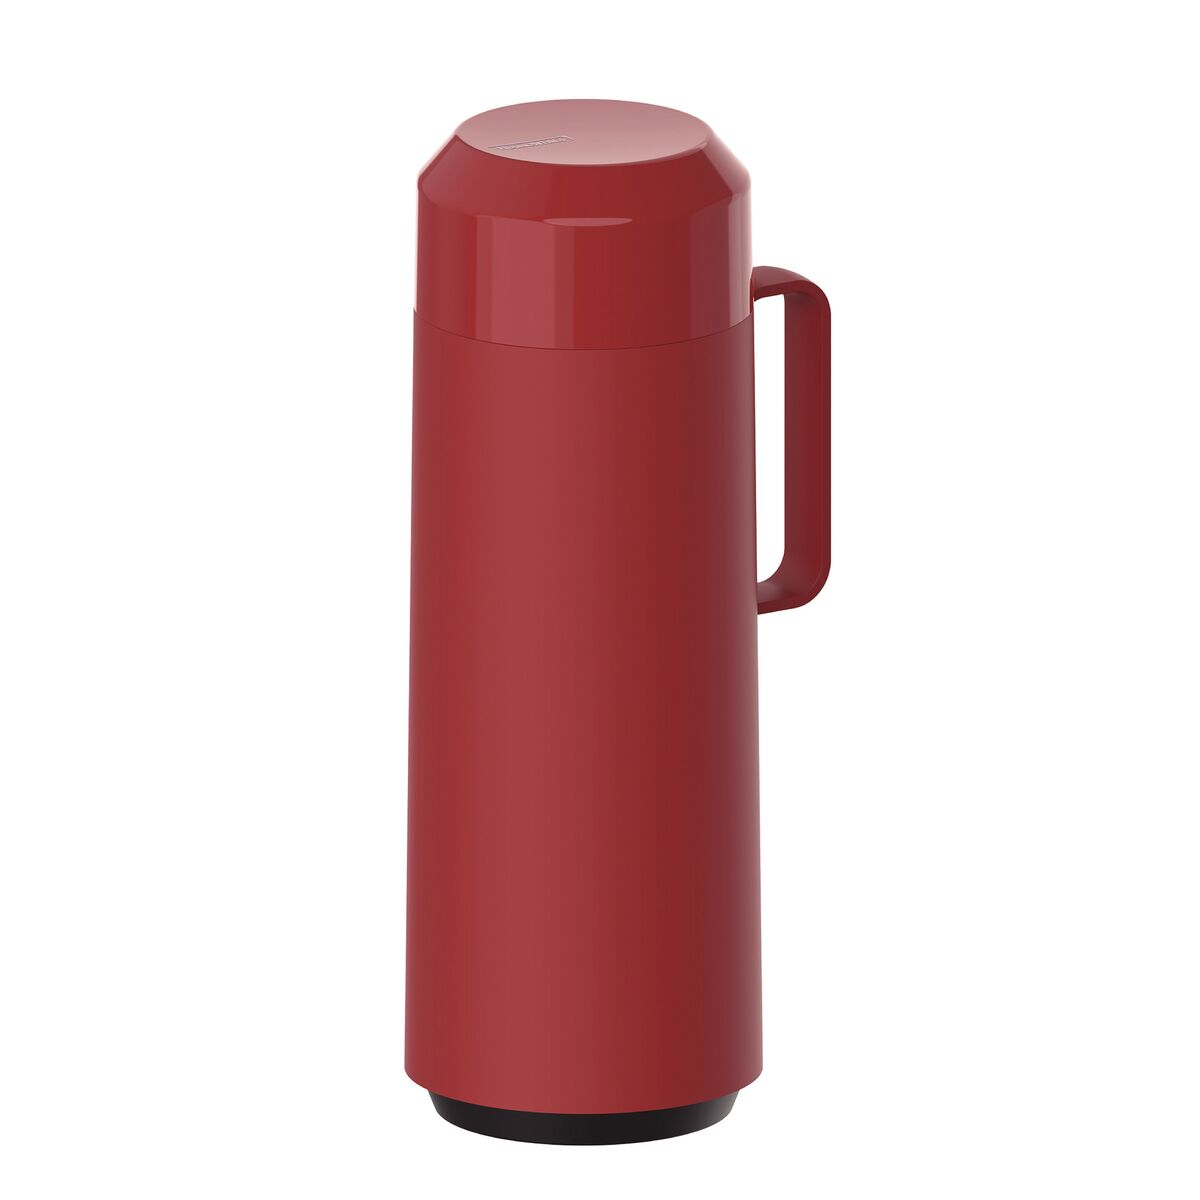 Tramontina Exata 1-L Red Plastic Thermal Beverage Dispenser with Glass Liner and Screw Lid